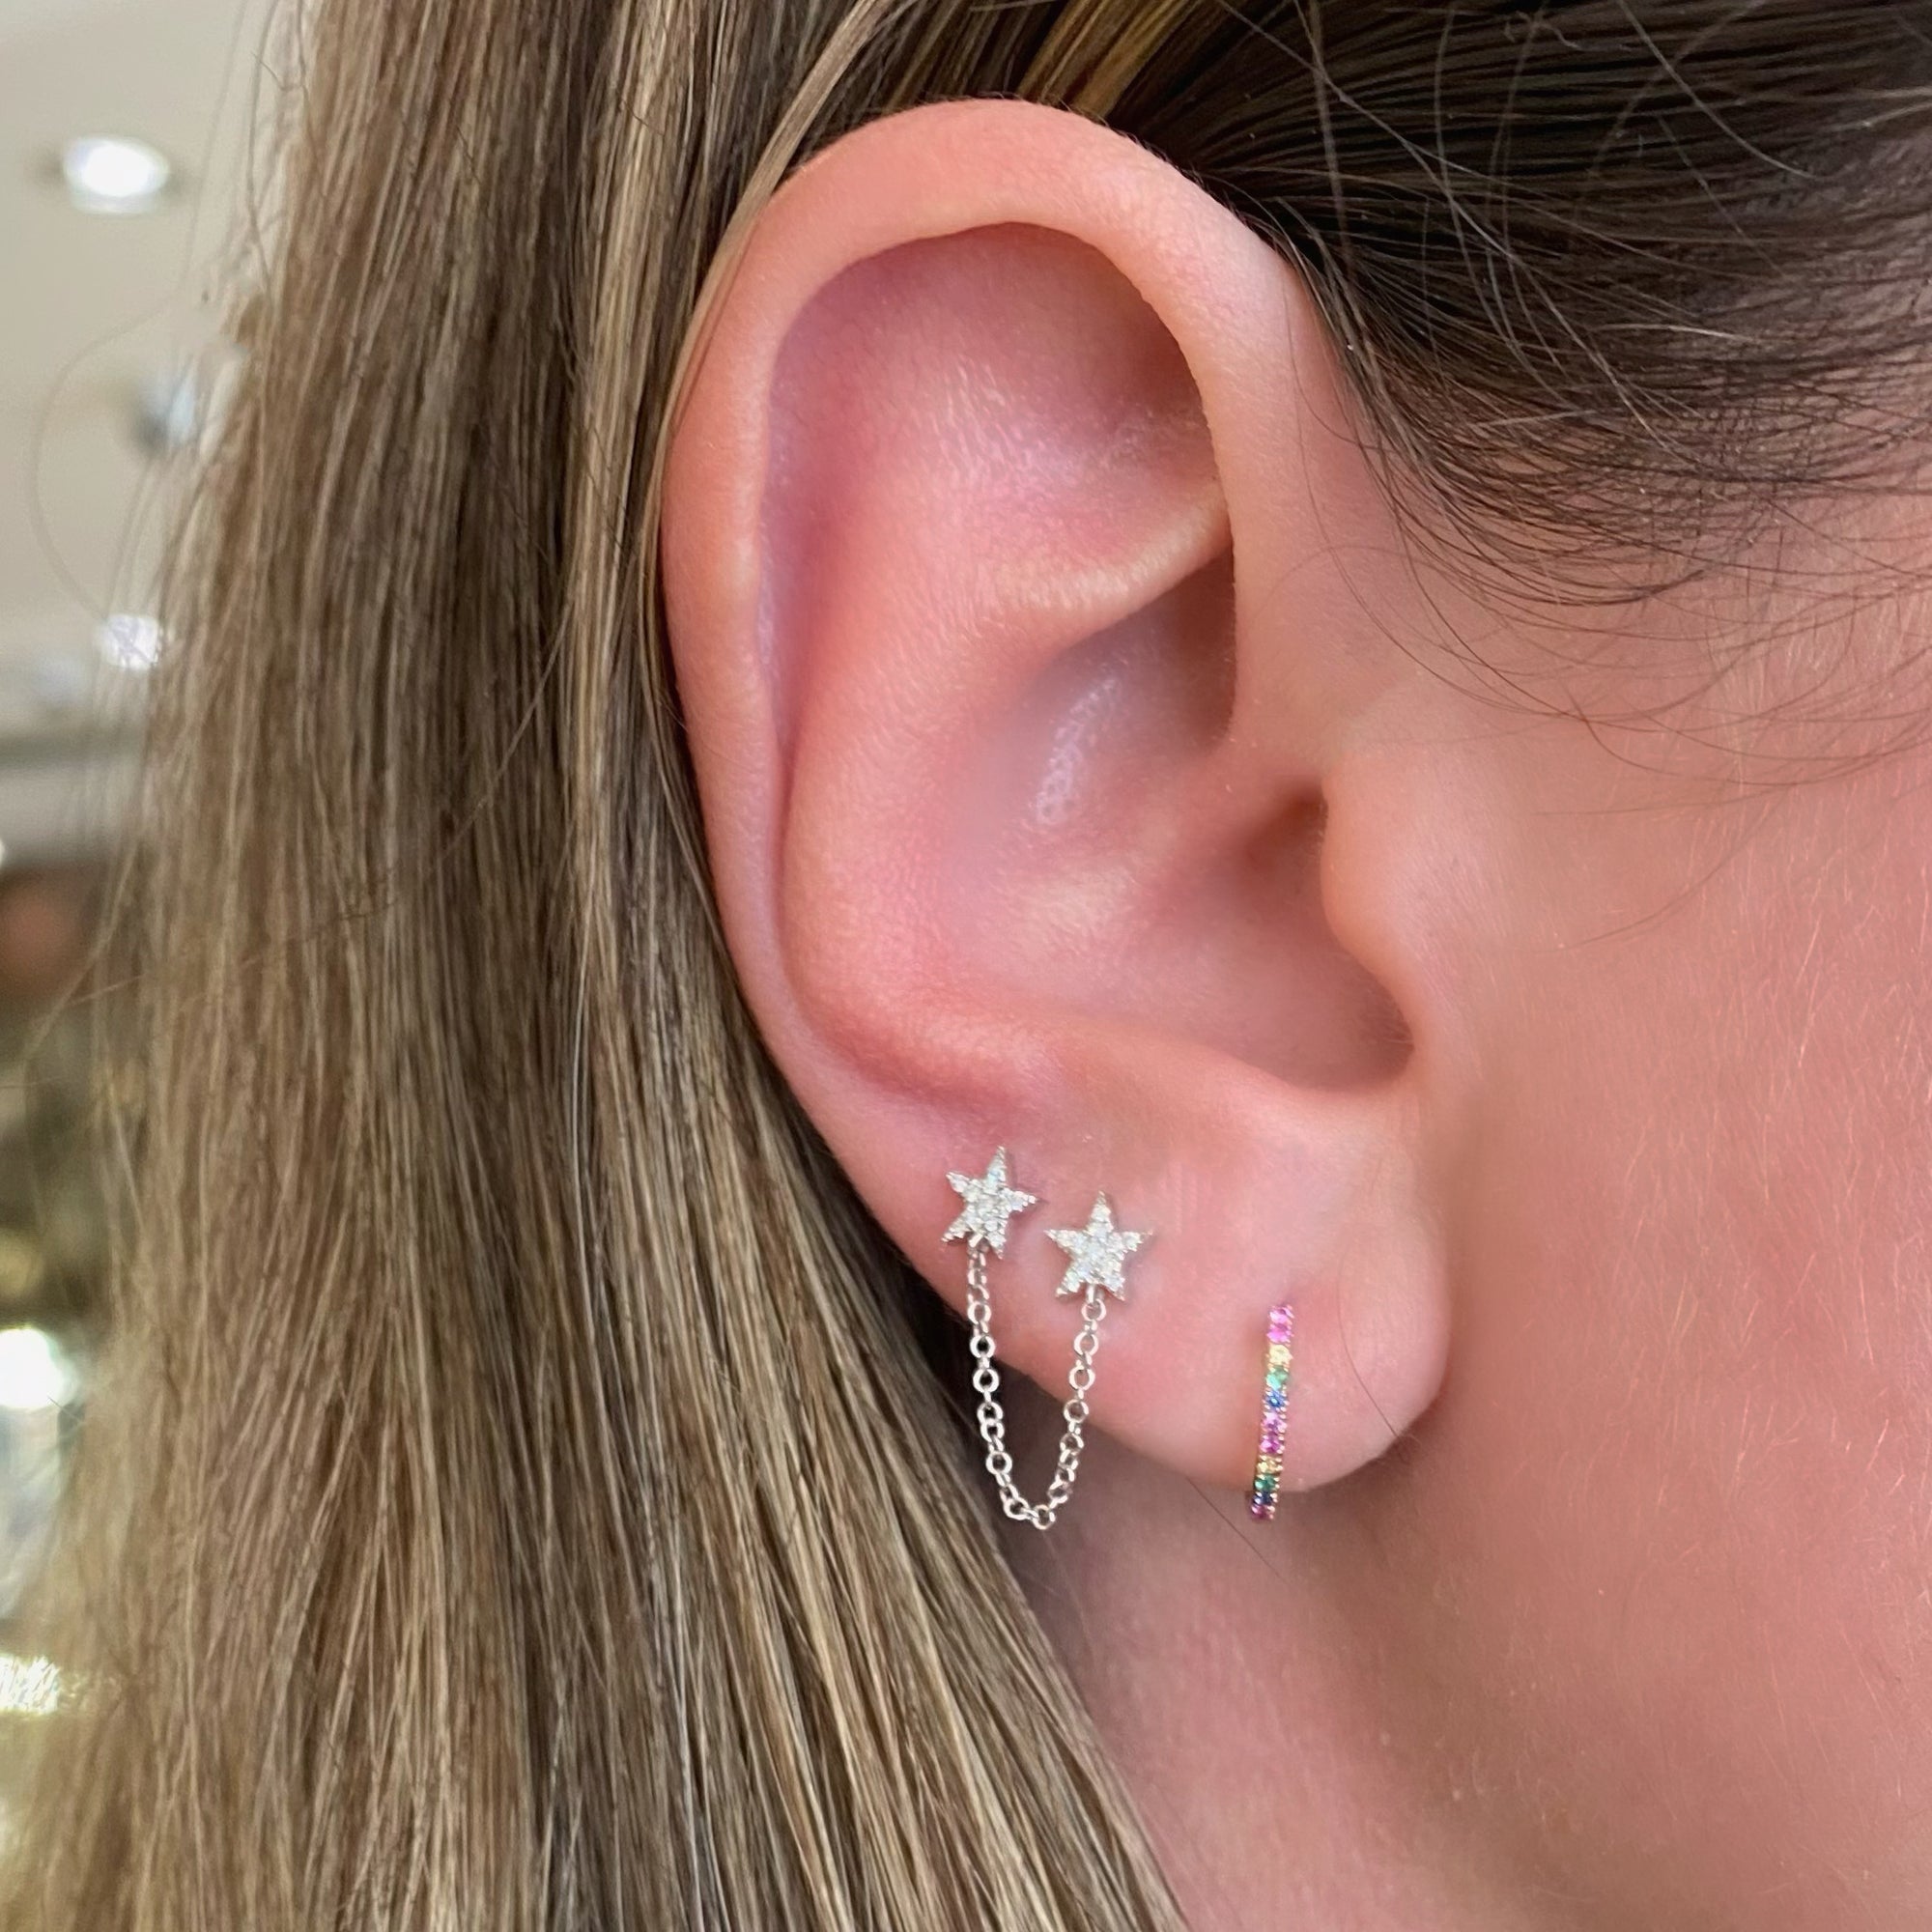 Diamond Double Star Chain Link Earring - 14K gold weighing 1.02 grams - 22 round diamonds totaling 0.05 carats